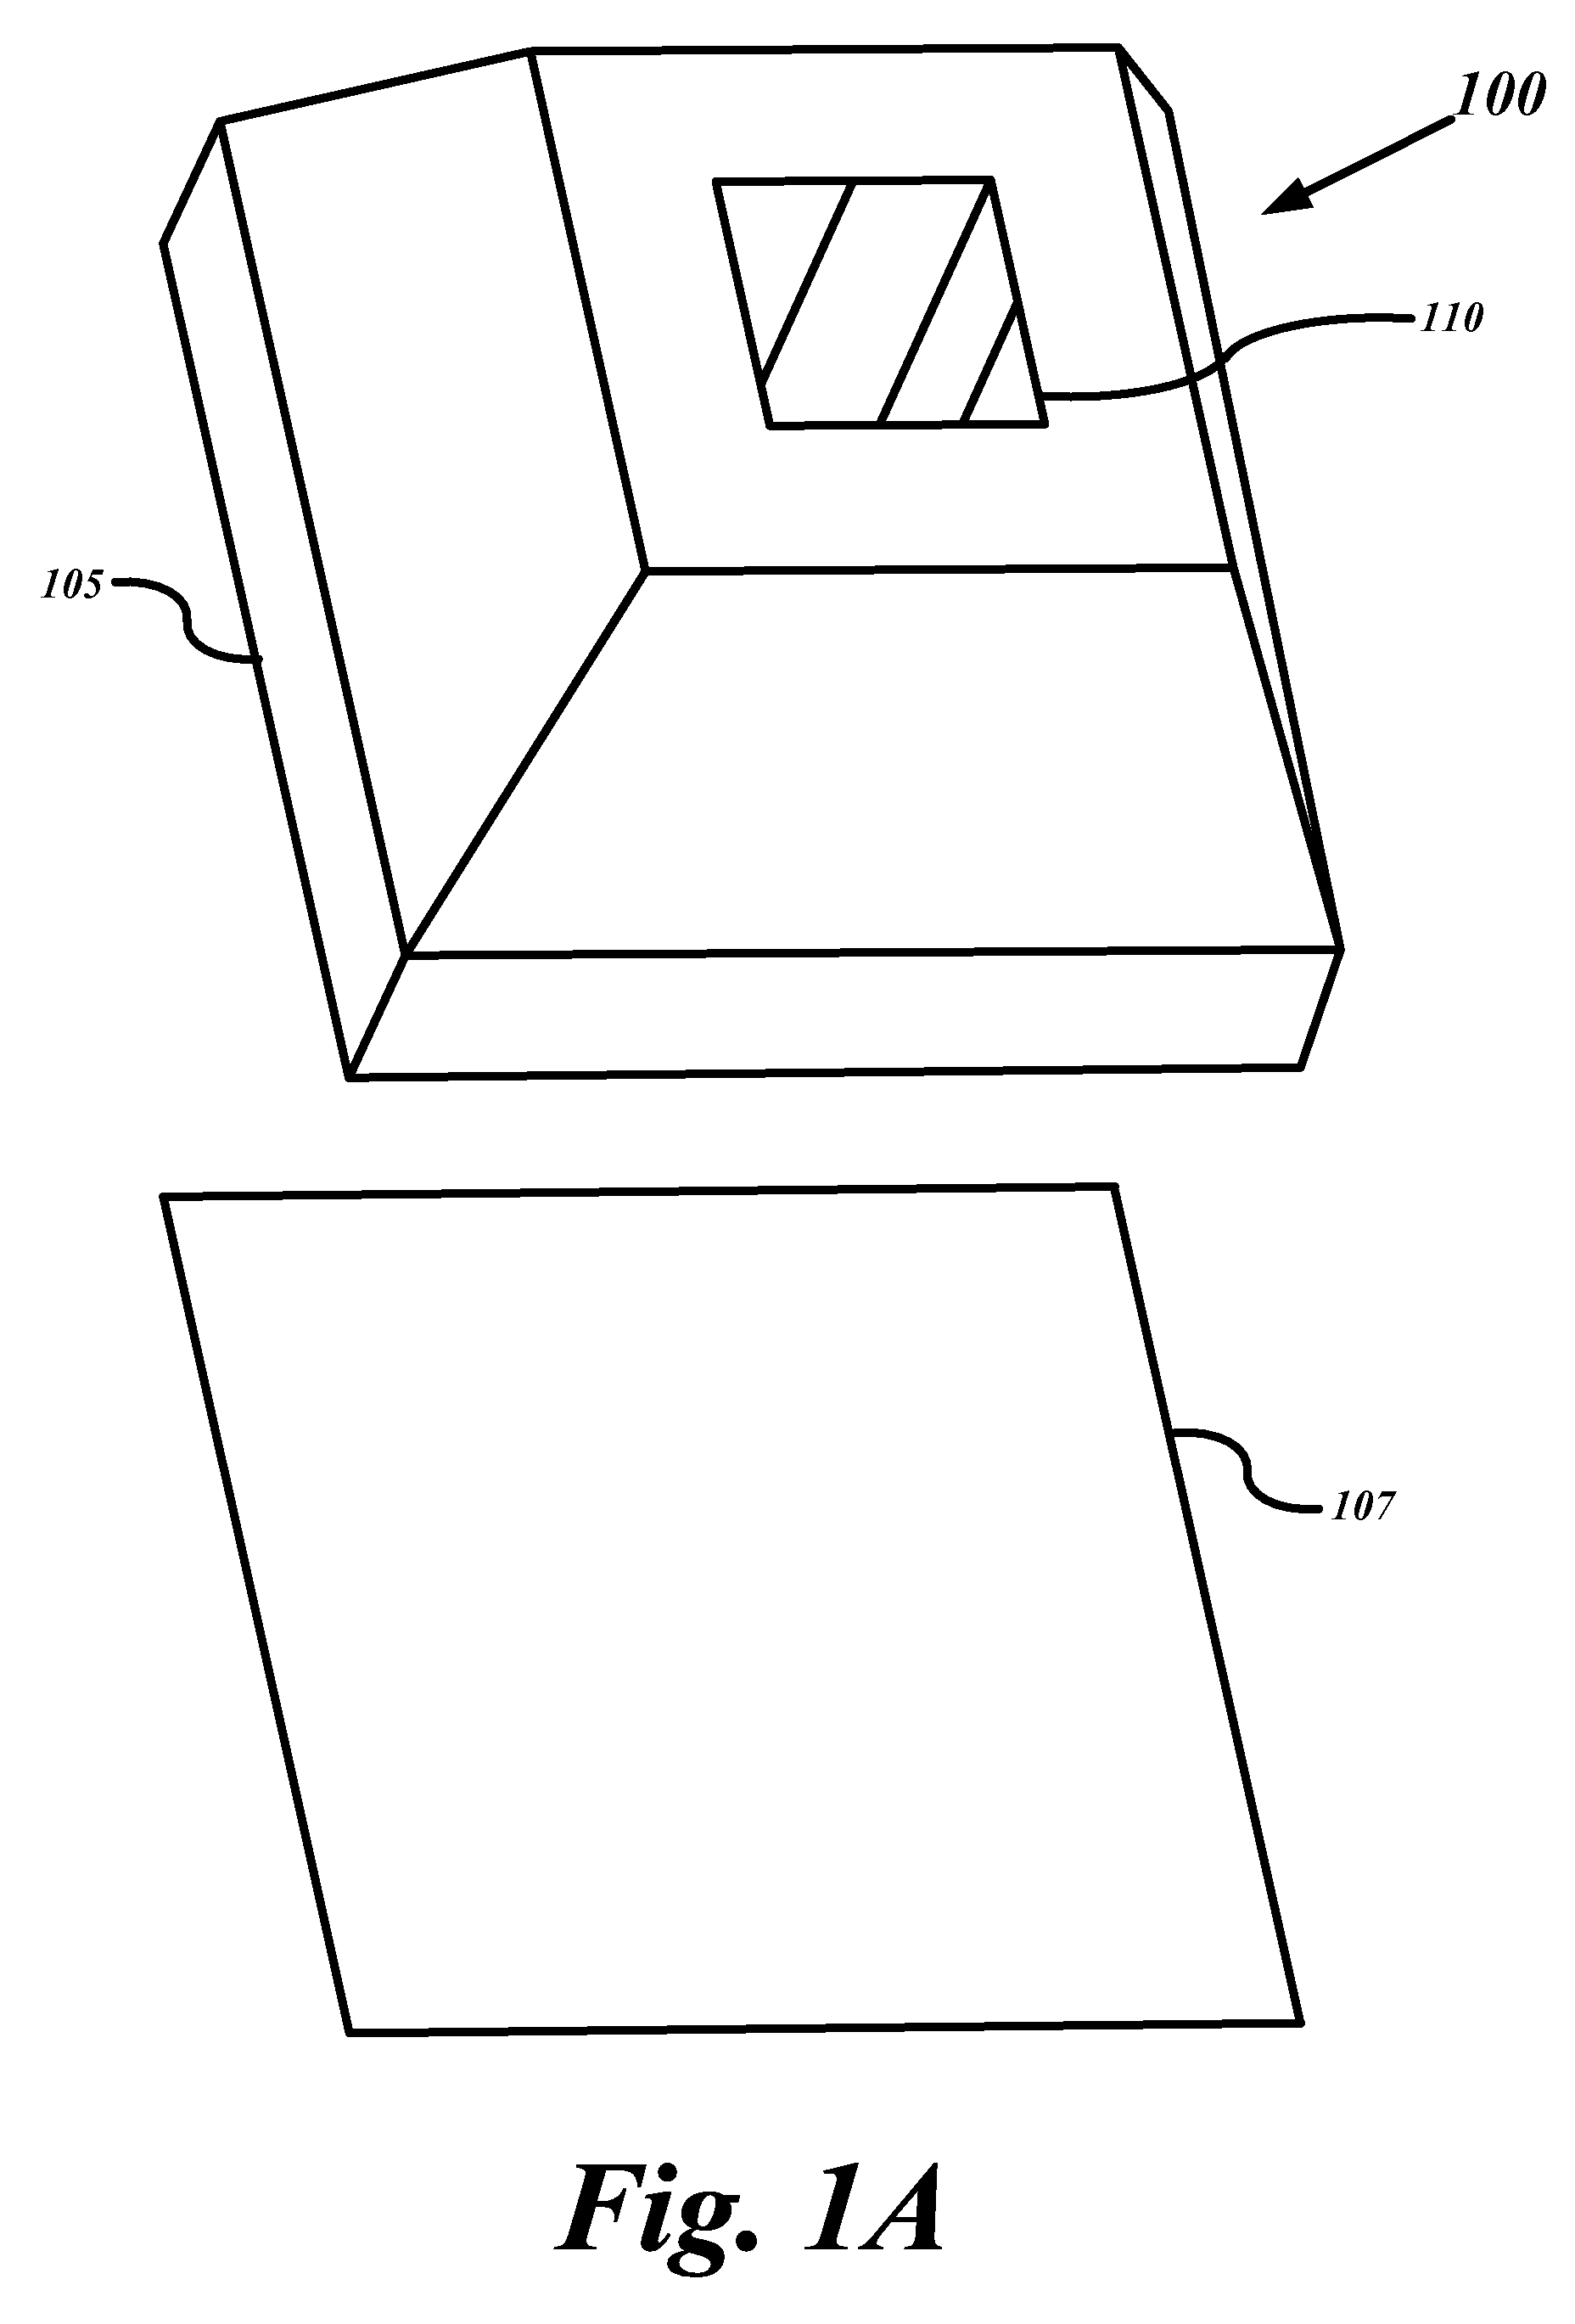 System and method of teaching and learning mathematics